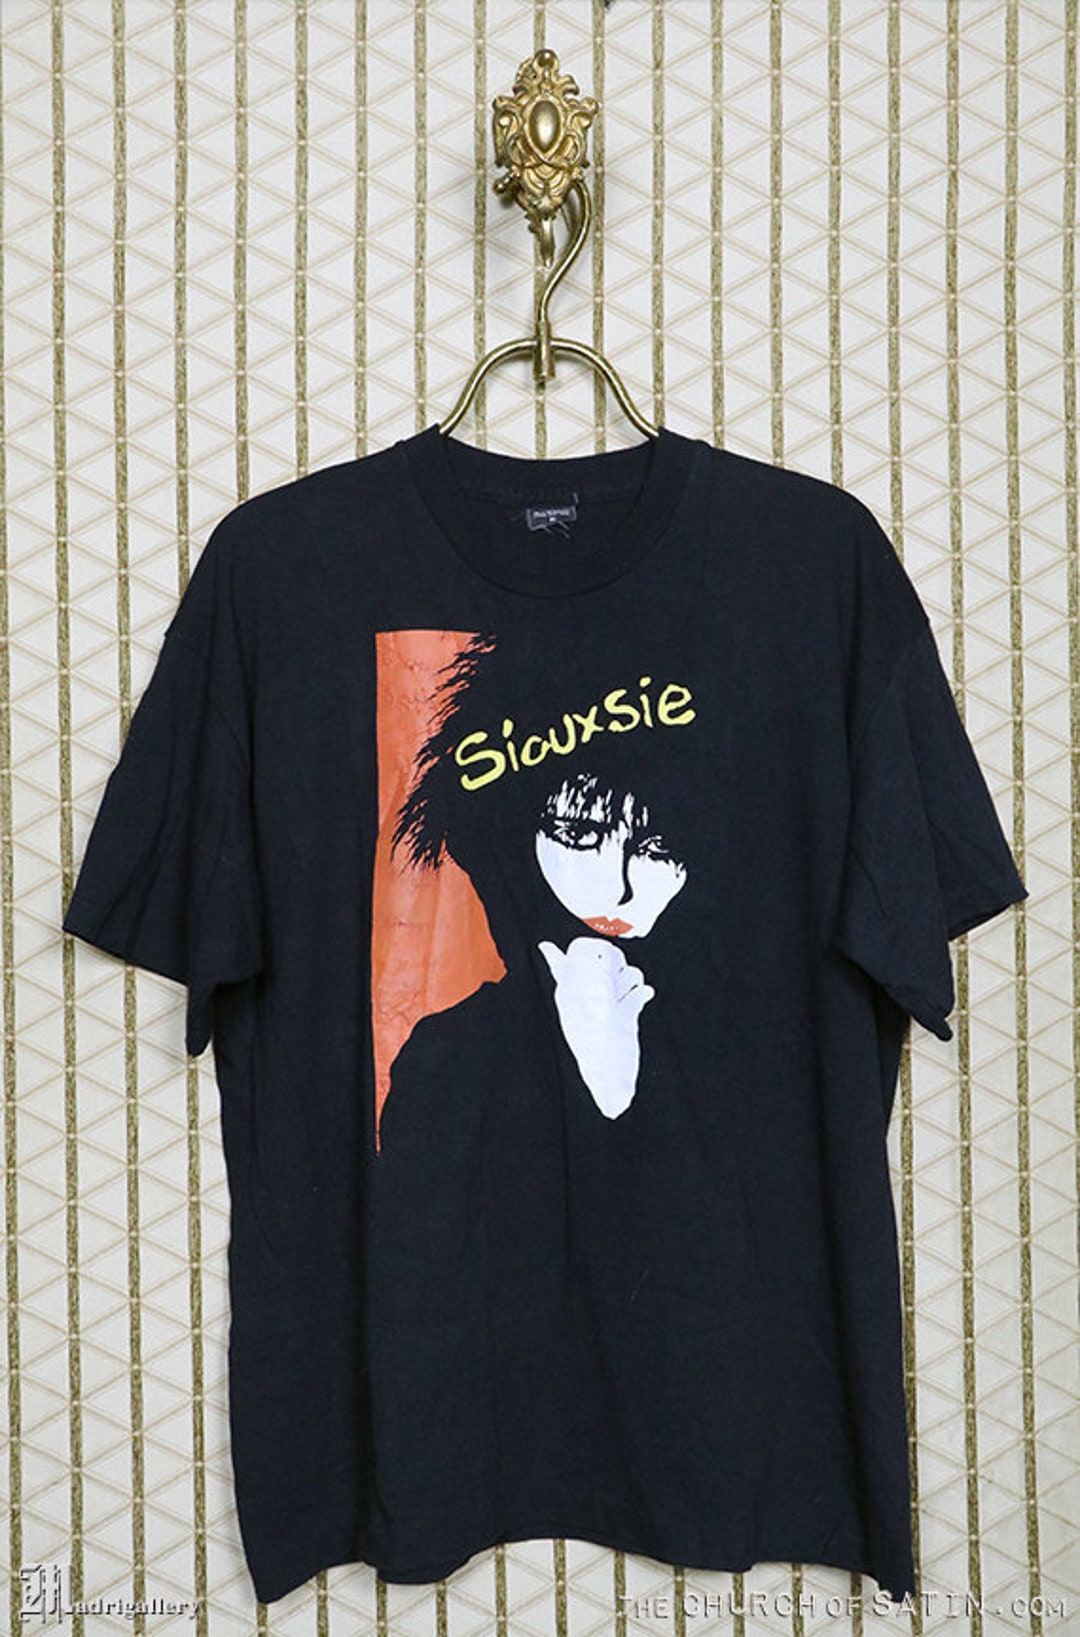 Siouxsie and the Banshees Vintage Rare T-shirt Siouxsie - Etsy